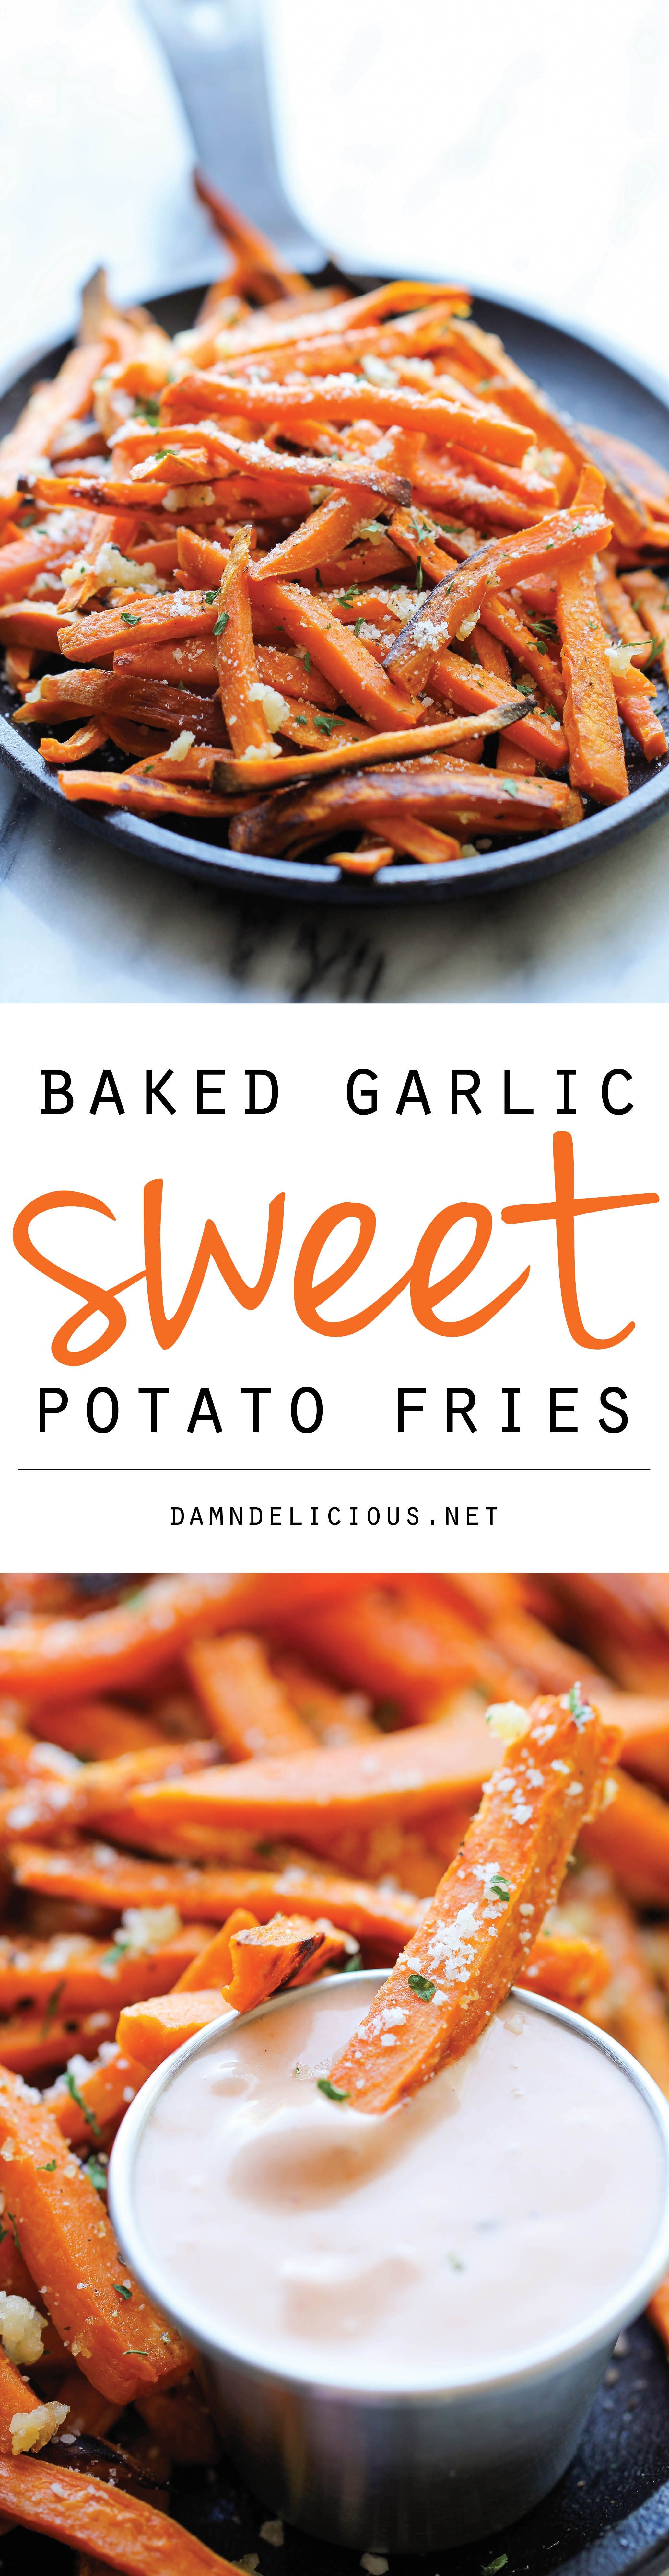 Baked Garlic Sweet Potato Fries – Amazingly crisp on the outside and tender on the inside, and so much better than the fried